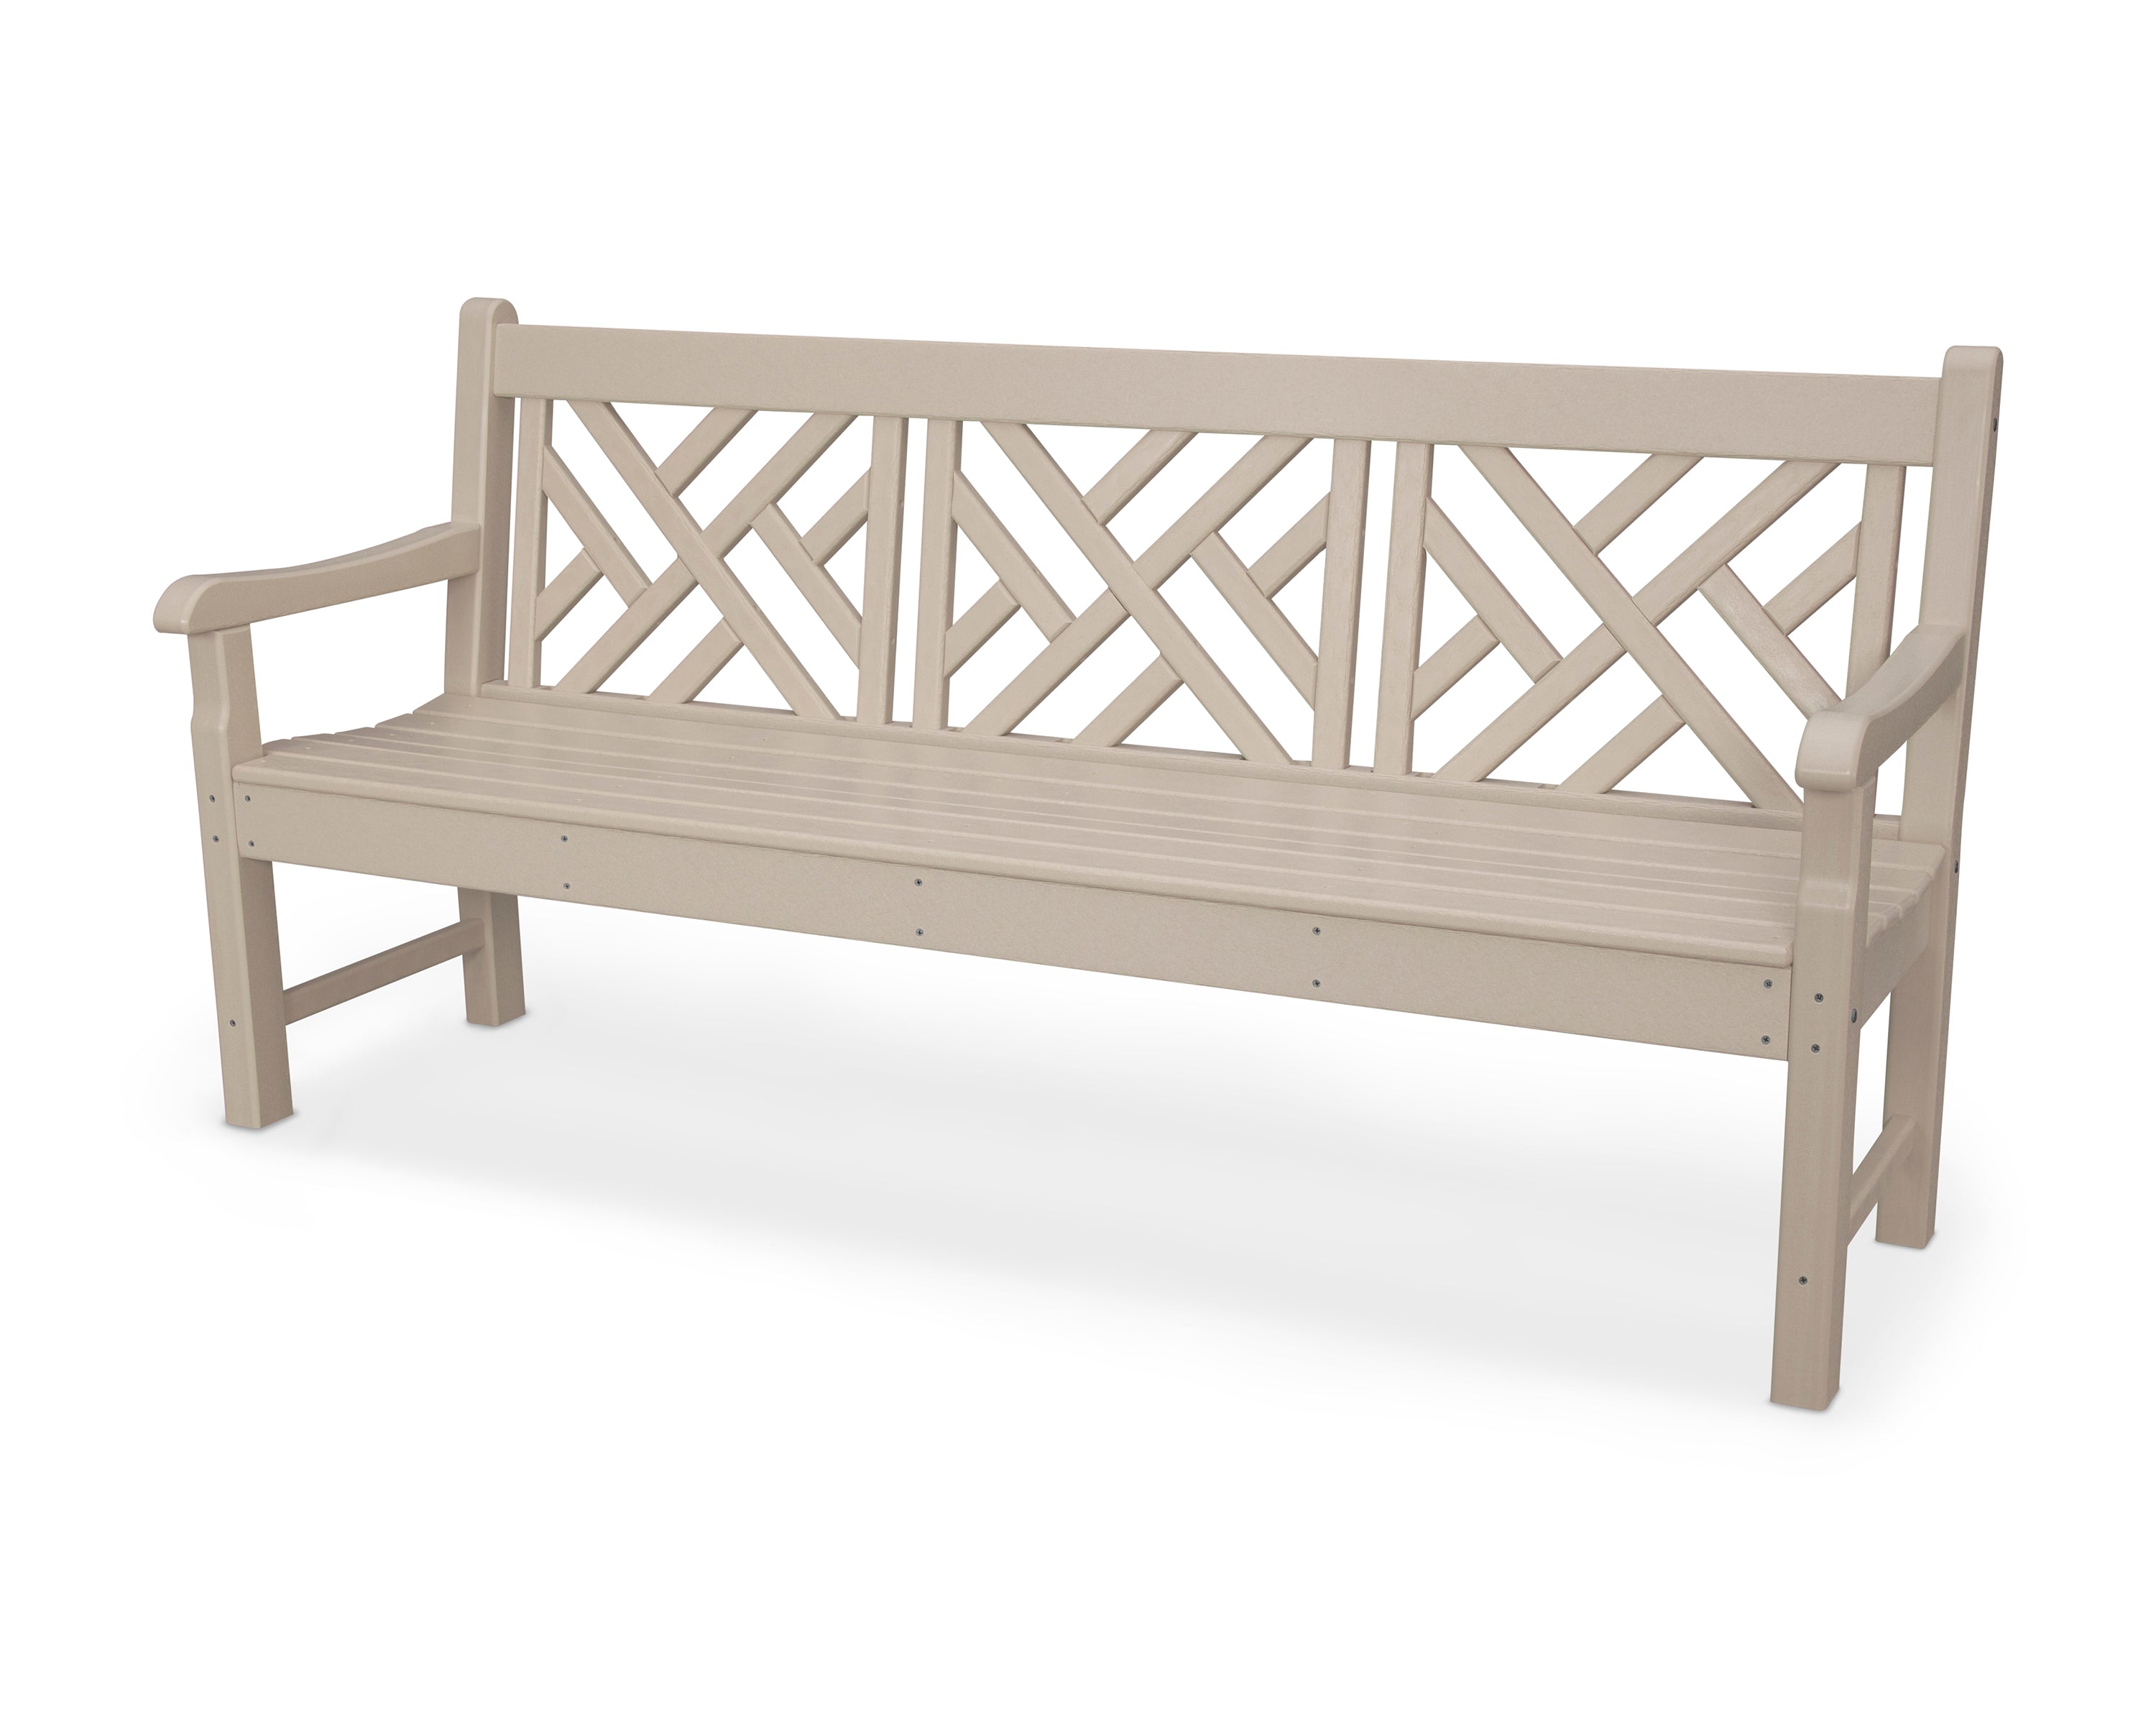 POLYWOOD® Rockford 72" Chippendale Bench in Sand